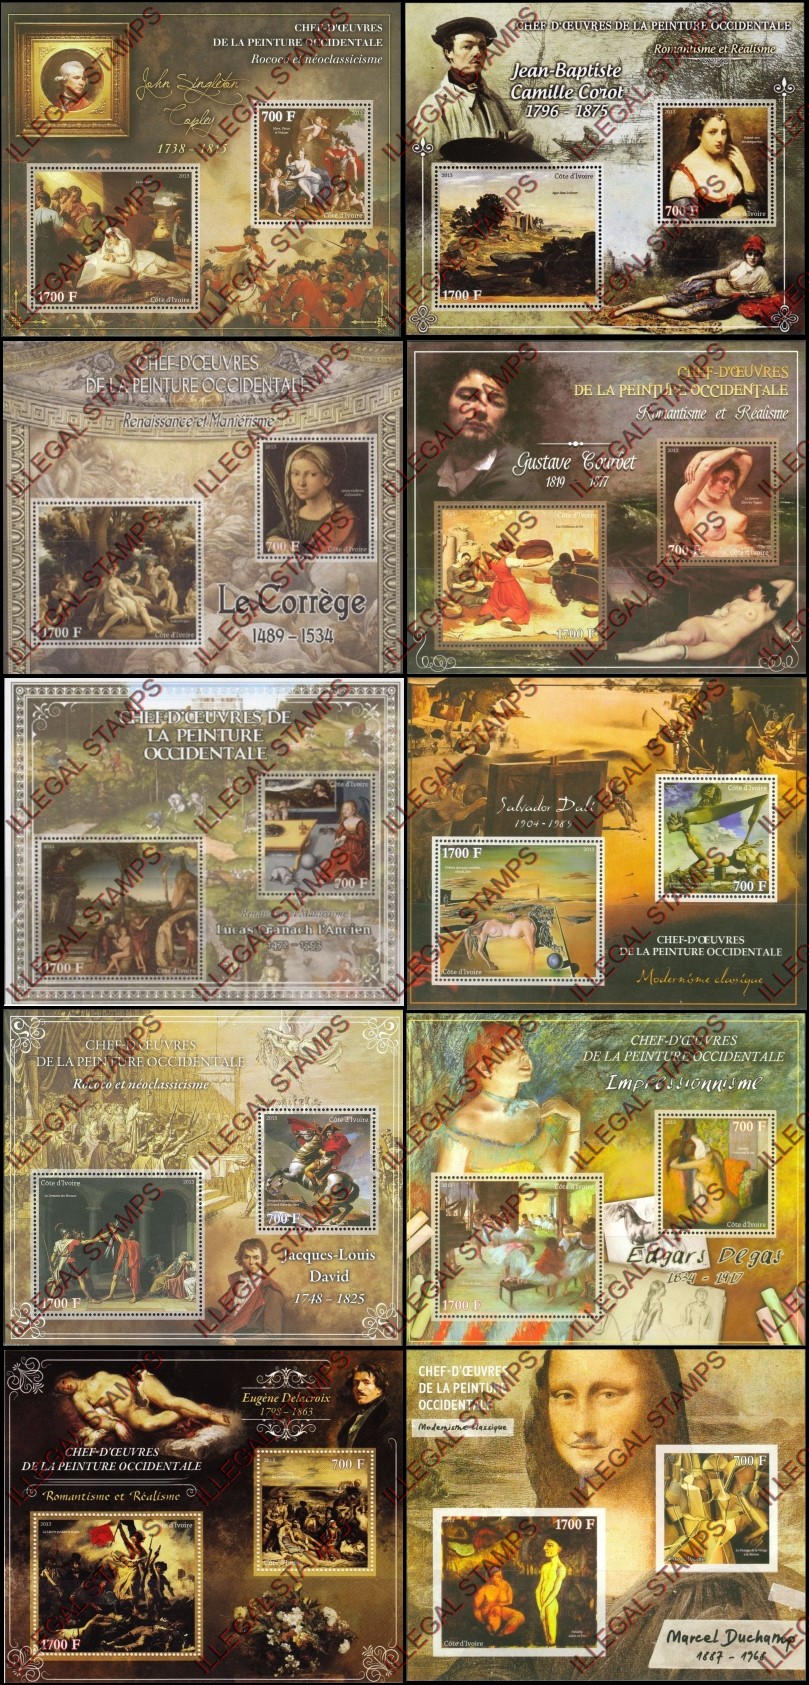 Ivory Coast 2013 Art Impressionism Paintings Illegal Stamp Souvenir Sheets of 2 (part 2)